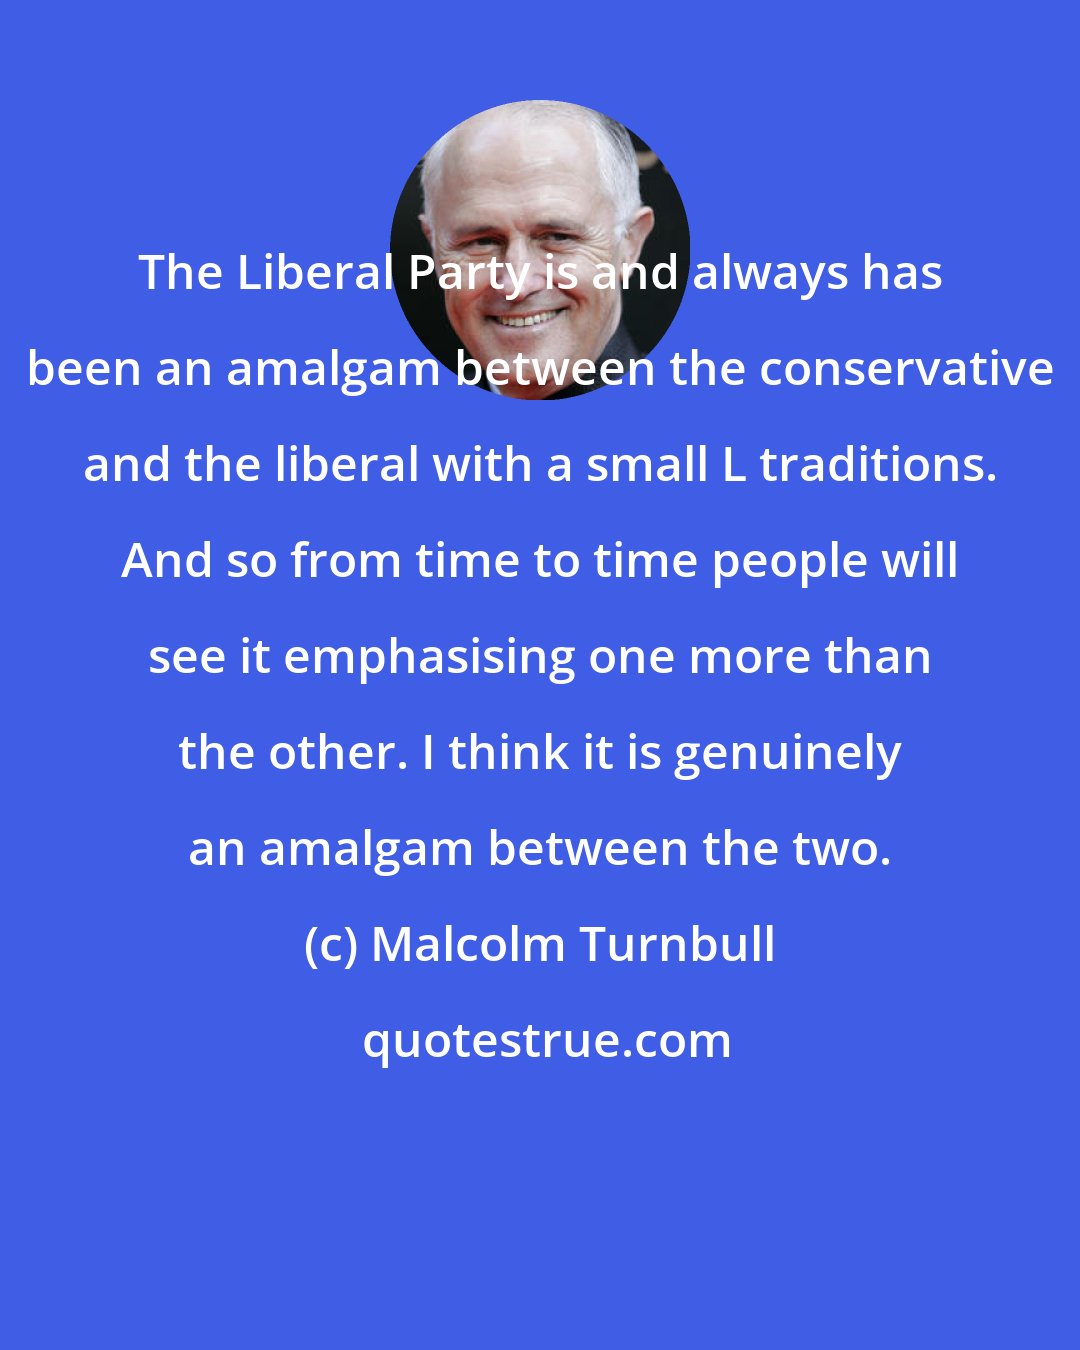 Malcolm Turnbull: The Liberal Party is and always has been an amalgam between the conservative and the liberal with a small L traditions. And so from time to time people will see it emphasising one more than the other. I think it is genuinely an amalgam between the two.